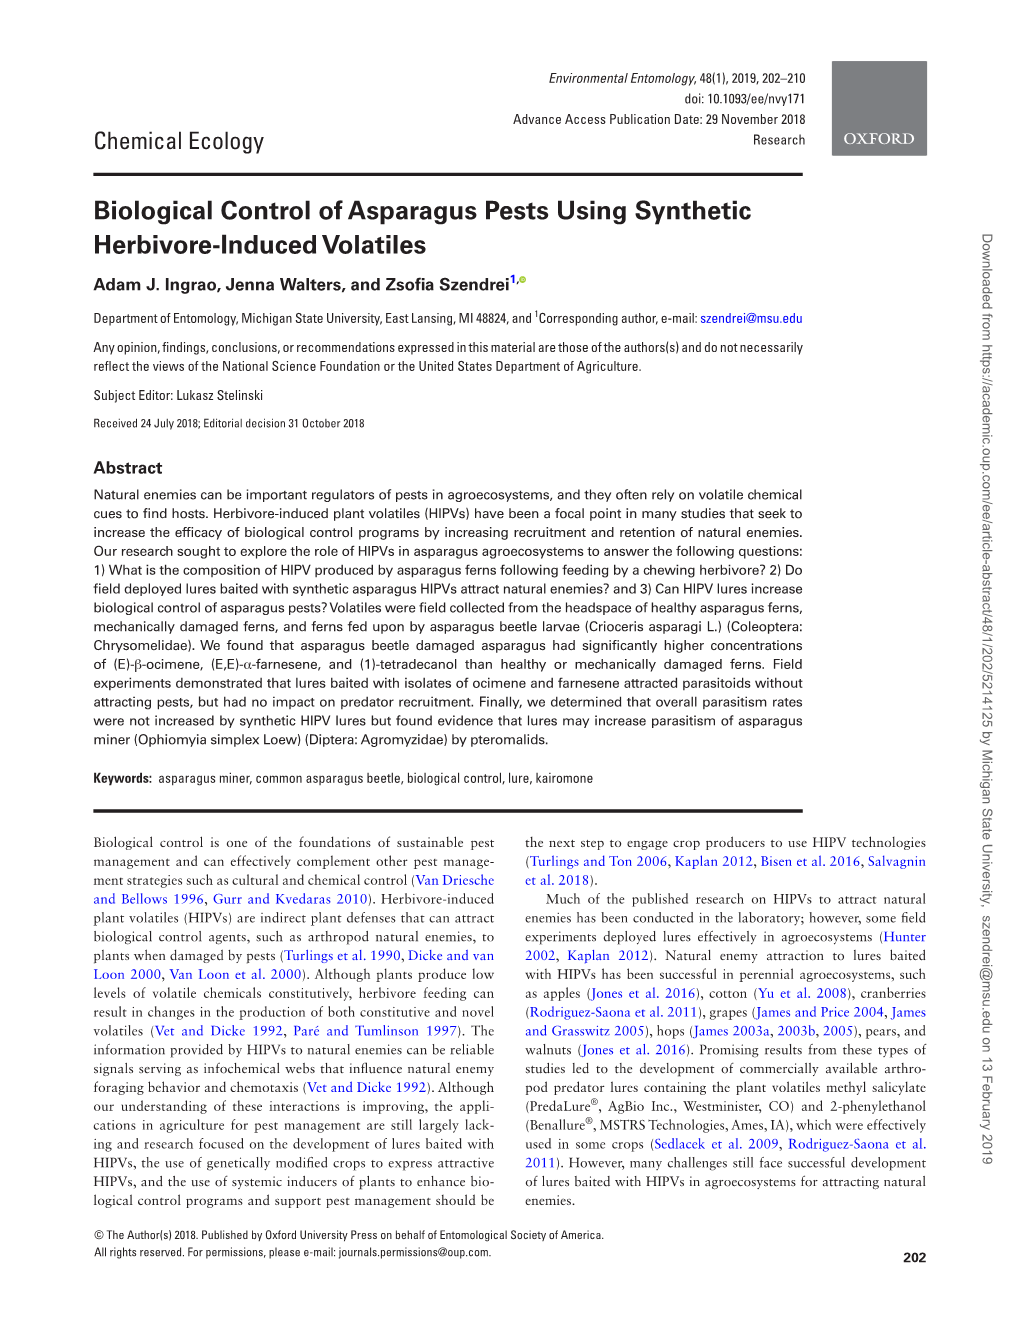 Biological Control of Asparagus Pests Using Synthetic Herbivore-Induced